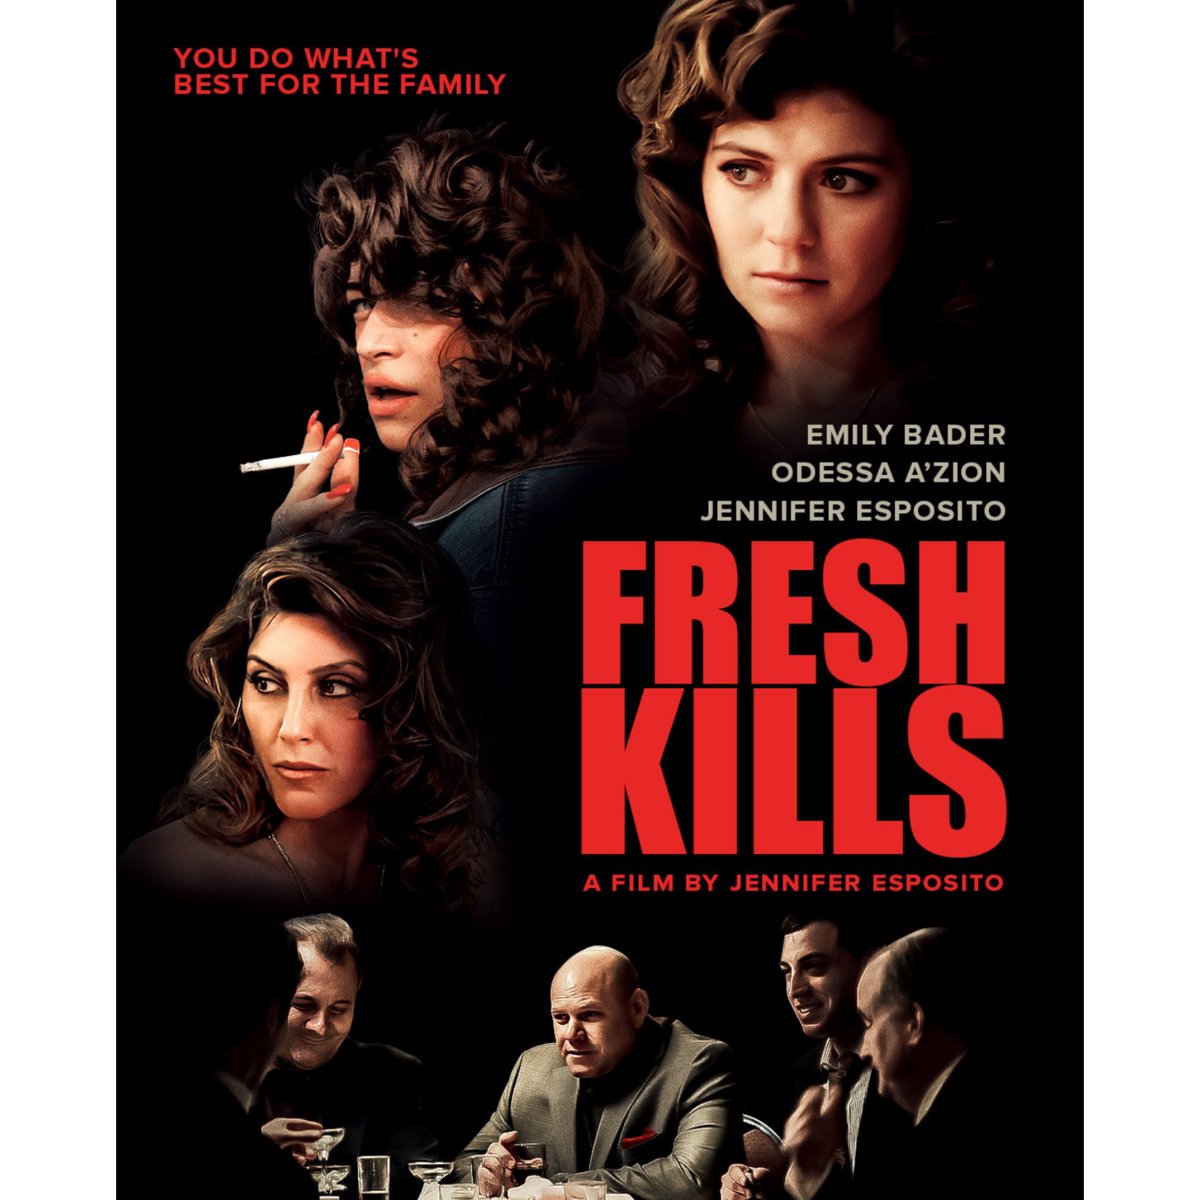 collider.com/jennifer-espos… The trailer for Fresh Kills just released. Thanks @Collider June 14th only in theaters. @QuiverDistrib